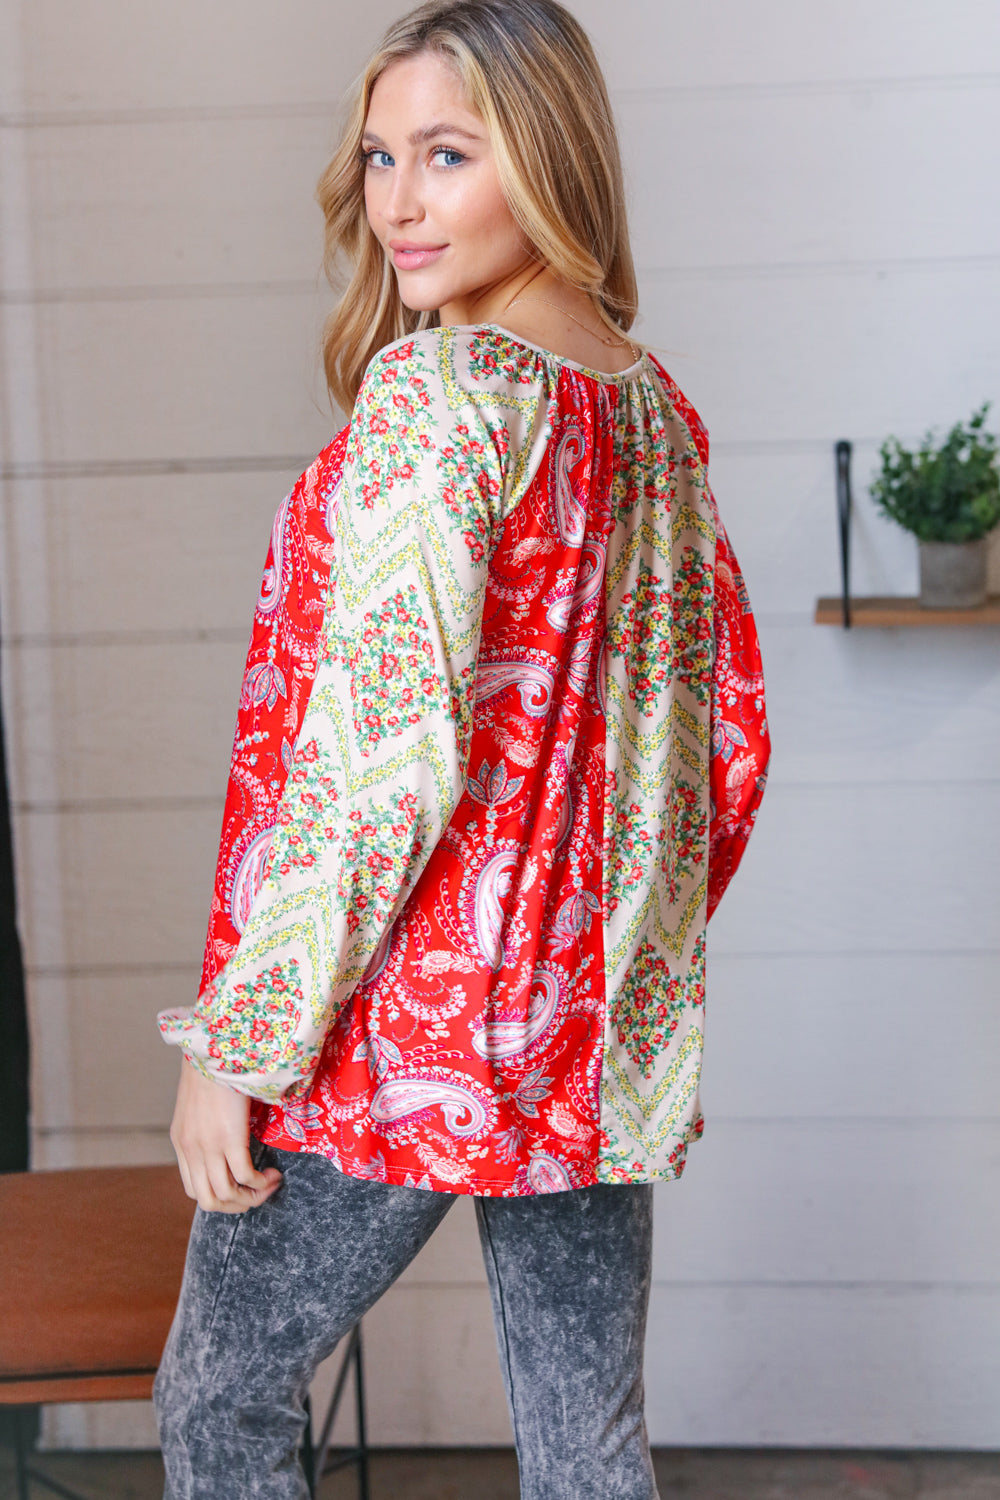 Scarlet Paisley and Floral Chevron Bubble Sleeve Top